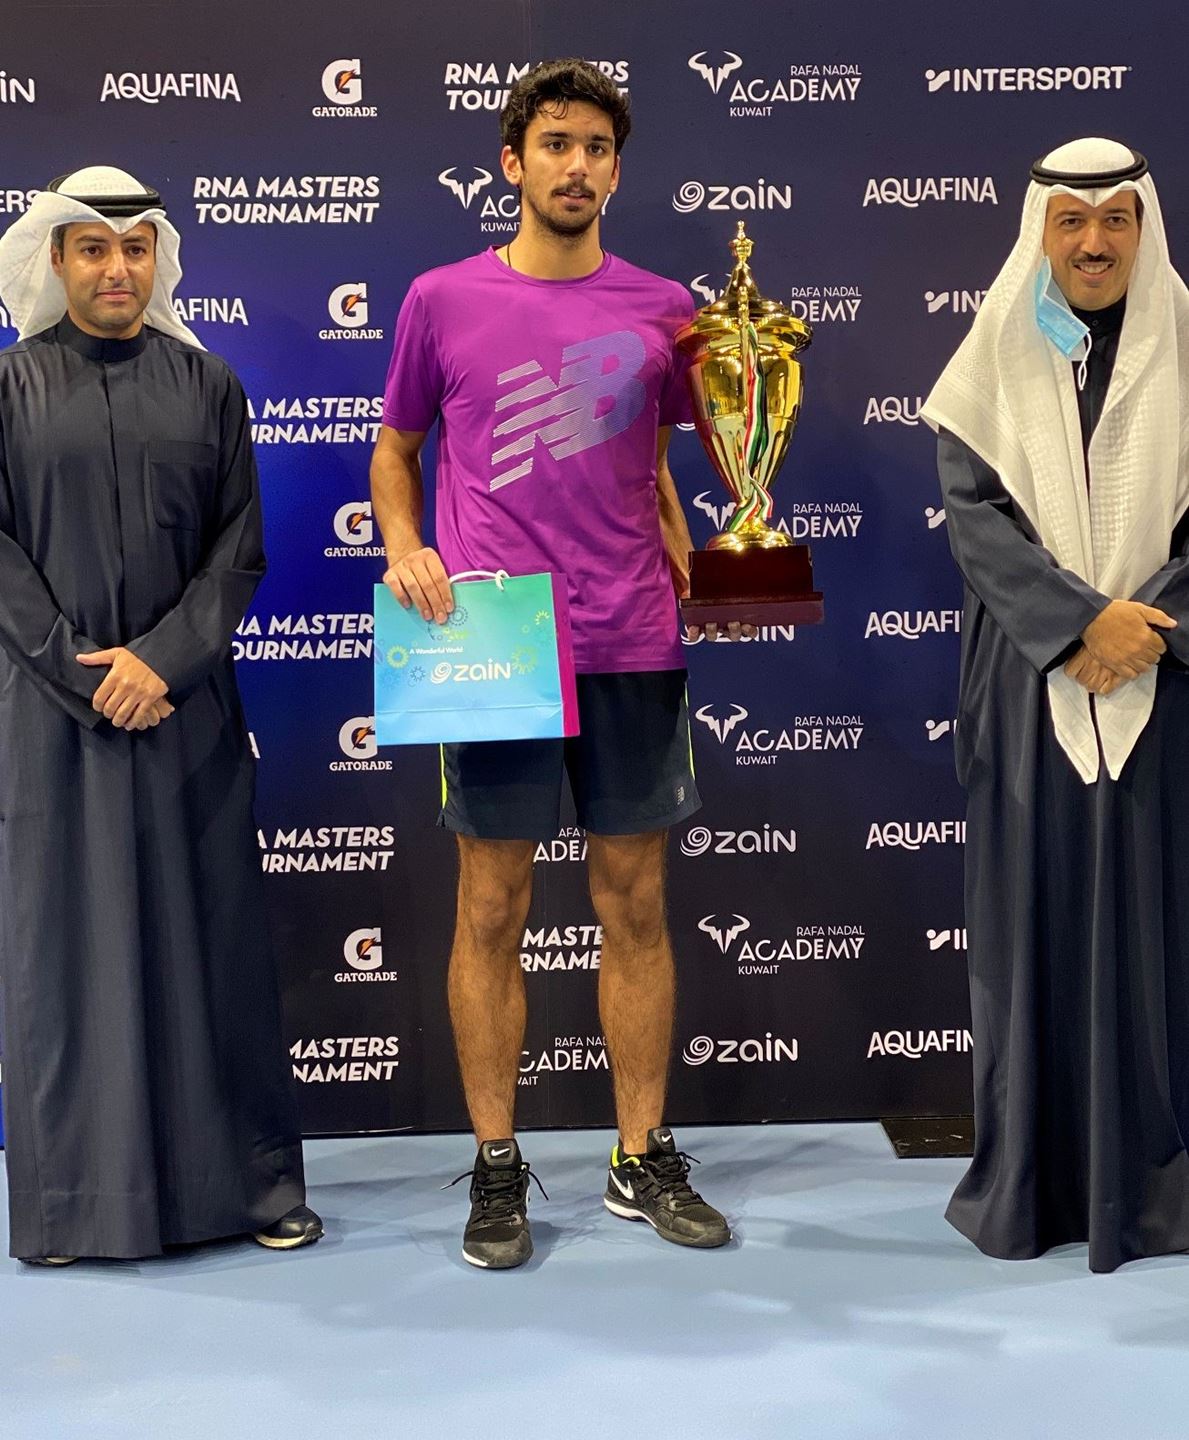 History Made as Inagural Rafa Nadal Academy Kuwait Masters Tournament Concludes